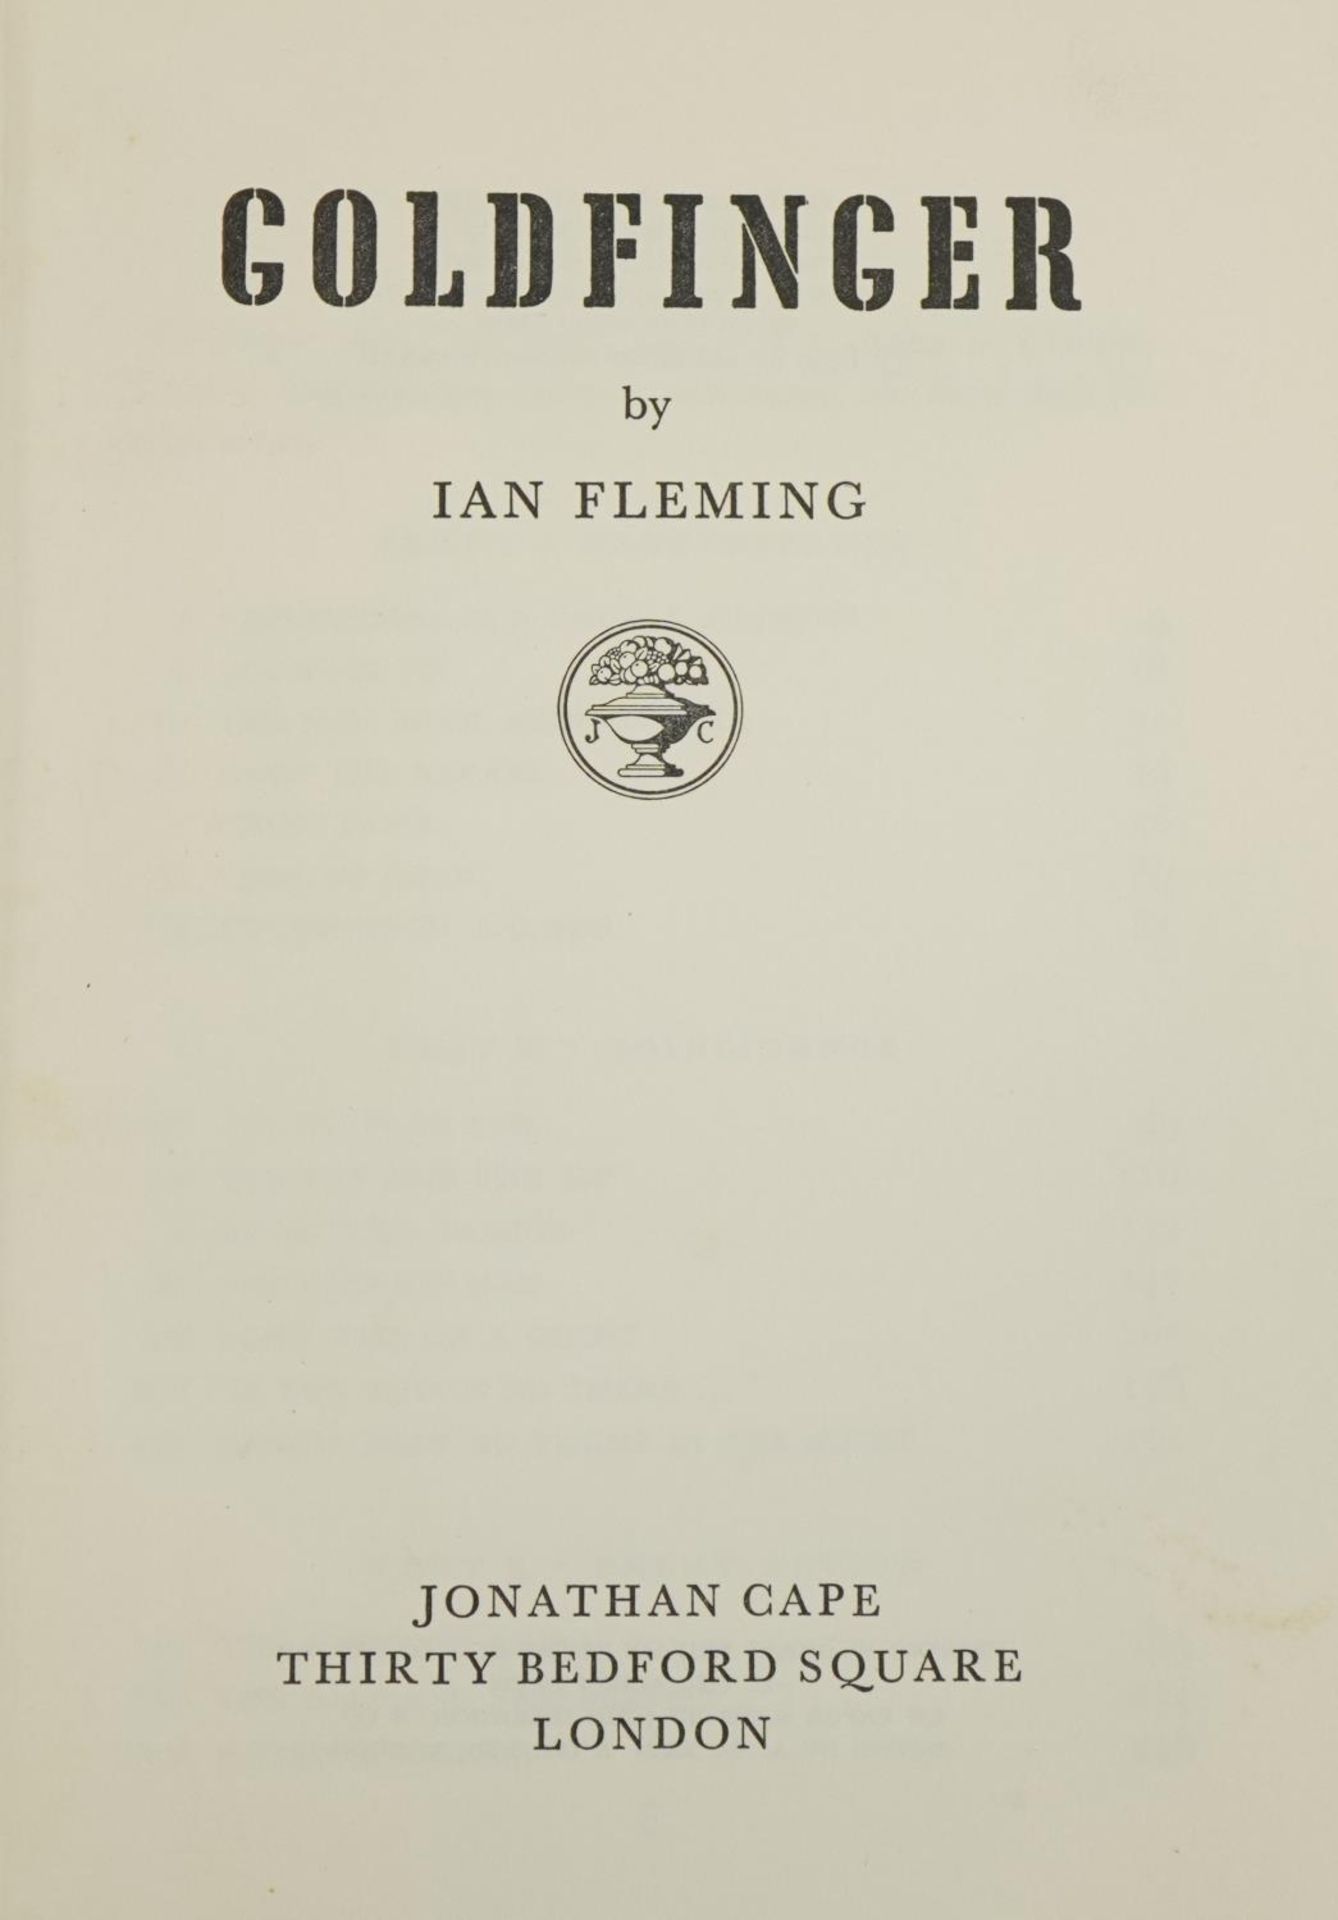 Seven hardback books with dust jackets by Ian Fleming including Goldfinger, For Your Eyes Only, - Image 2 of 3